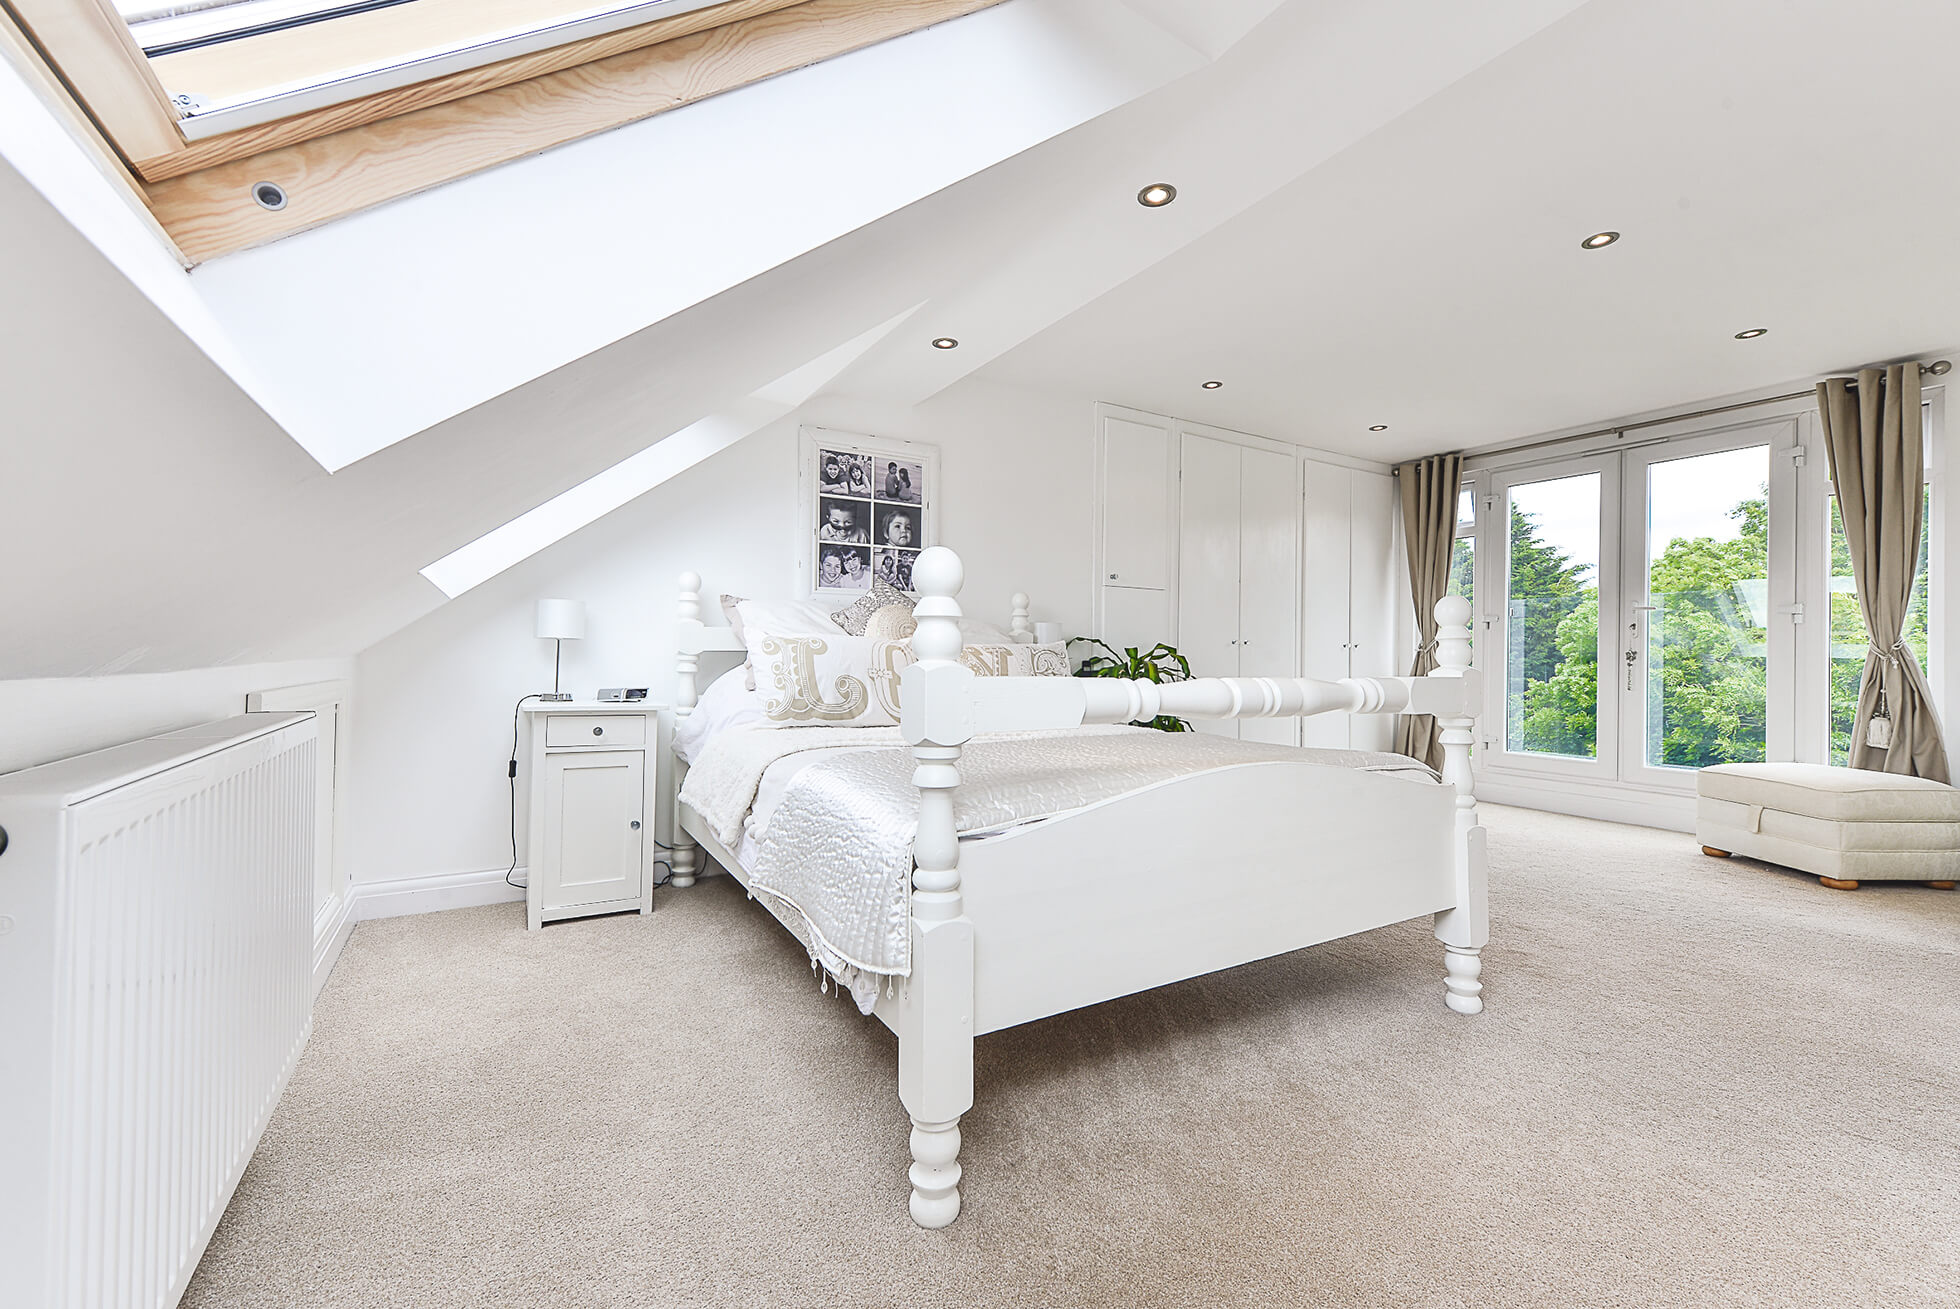 Do you have a question about converting your Loft in Barleycroft End? Here are the most popular questions asked by our clients.